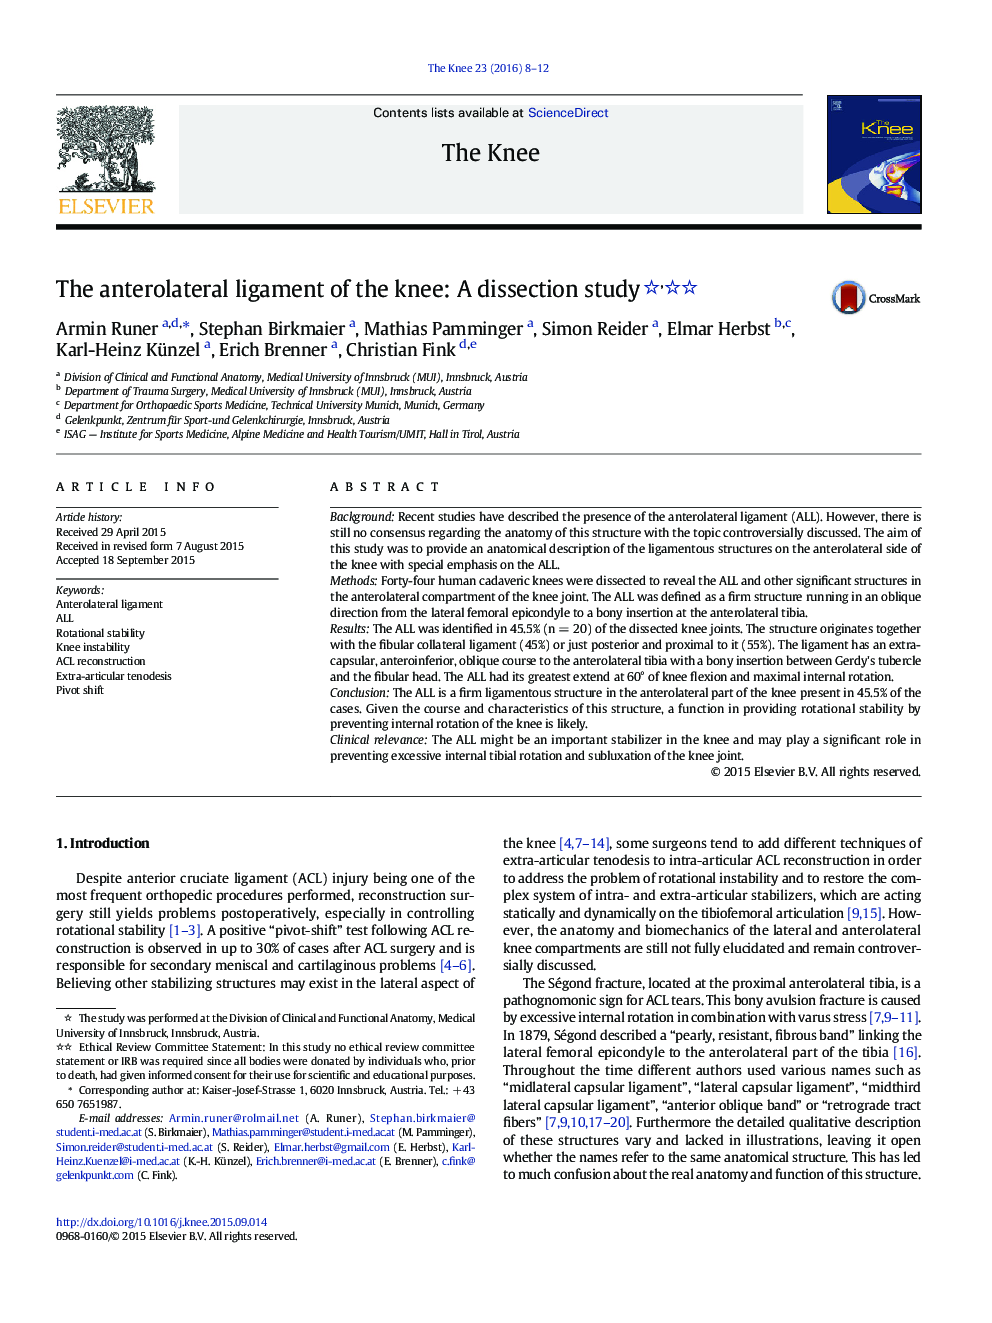 The anterolateral ligament of the knee: A dissection study 